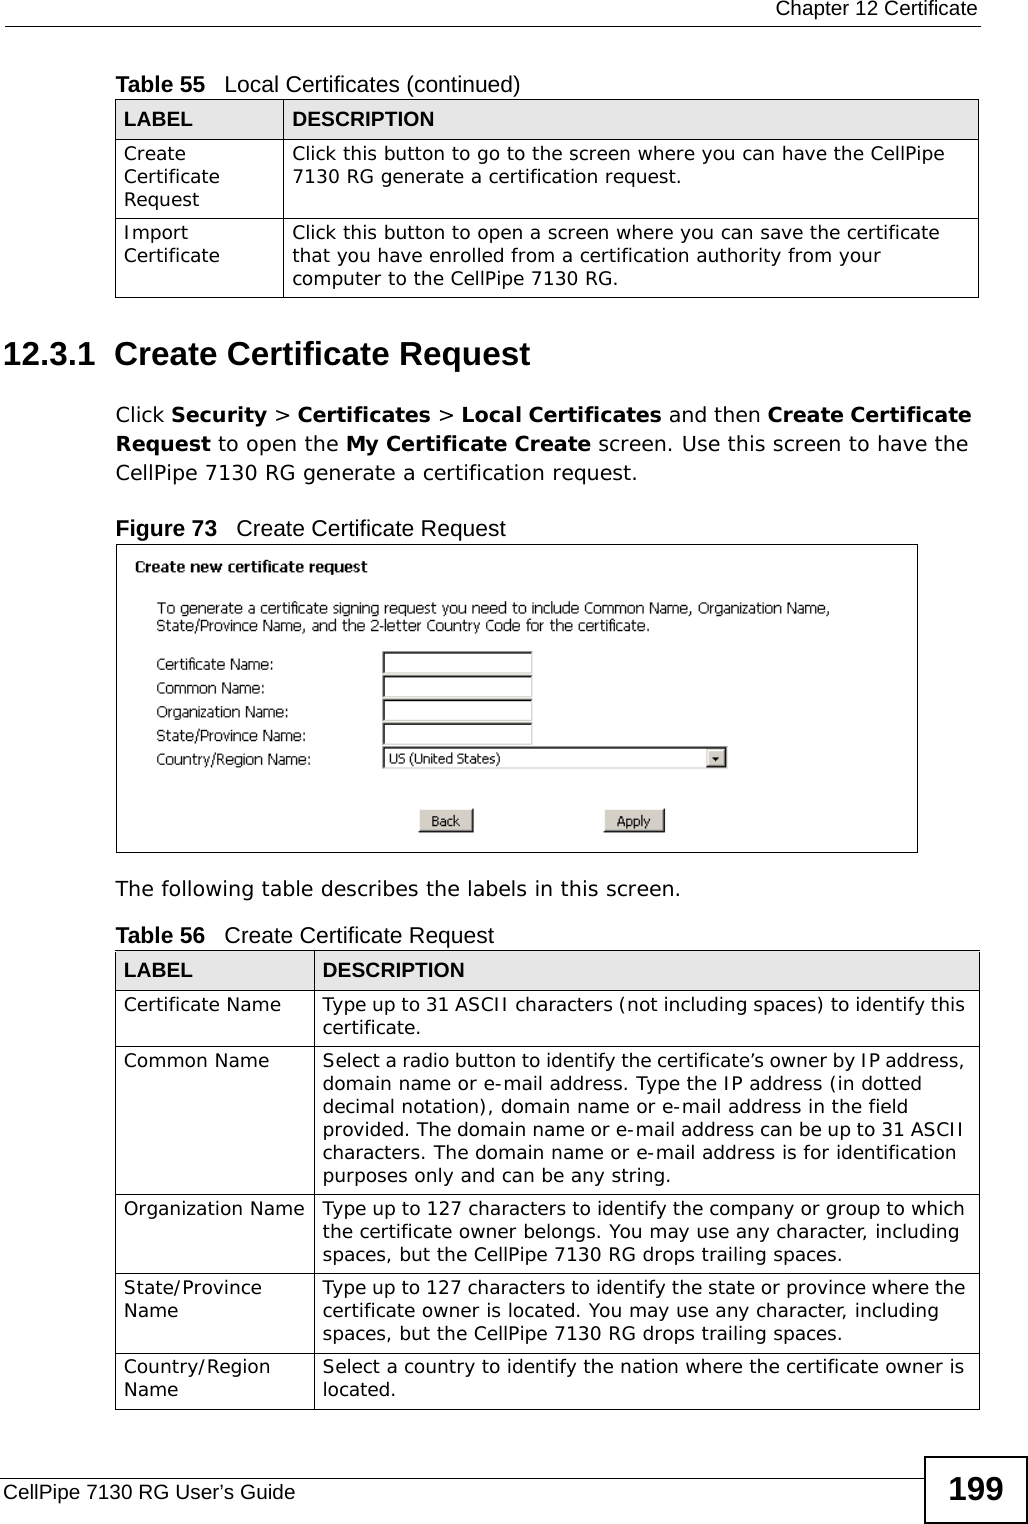  Chapter 12 CertificateCellPipe 7130 RG User’s Guide 19912.3.1  Create Certificate Request Click Security &gt; Certificates &gt; Local Certificates and then Create Certificate Request to open the My Certificate Create screen. Use this screen to have the CellPipe 7130 RG generate a certification request.Figure 73   Create Certificate RequestThe following table describes the labels in this screen. Create Certificate RequestClick this button to go to the screen where you can have the CellPipe 7130 RG generate a certification request.Import Certificate Click this button to open a screen where you can save the certificate that you have enrolled from a certification authority from your computer to the CellPipe 7130 RG.Table 55   Local Certificates (continued)LABEL DESCRIPTIONTable 56   Create Certificate RequestLABEL DESCRIPTIONCertificate Name Type up to 31 ASCII characters (not including spaces) to identify this certificate. Common Name  Select a radio button to identify the certificate’s owner by IP address, domain name or e-mail address. Type the IP address (in dotted decimal notation), domain name or e-mail address in the field provided. The domain name or e-mail address can be up to 31 ASCII characters. The domain name or e-mail address is for identification purposes only and can be any string.Organization Name Type up to 127 characters to identify the company or group to which the certificate owner belongs. You may use any character, including spaces, but the CellPipe 7130 RG drops trailing spaces.State/Province Name Type up to 127 characters to identify the state or province where the certificate owner is located. You may use any character, including spaces, but the CellPipe 7130 RG drops trailing spaces.Country/Region Name Select a country to identify the nation where the certificate owner is located. 